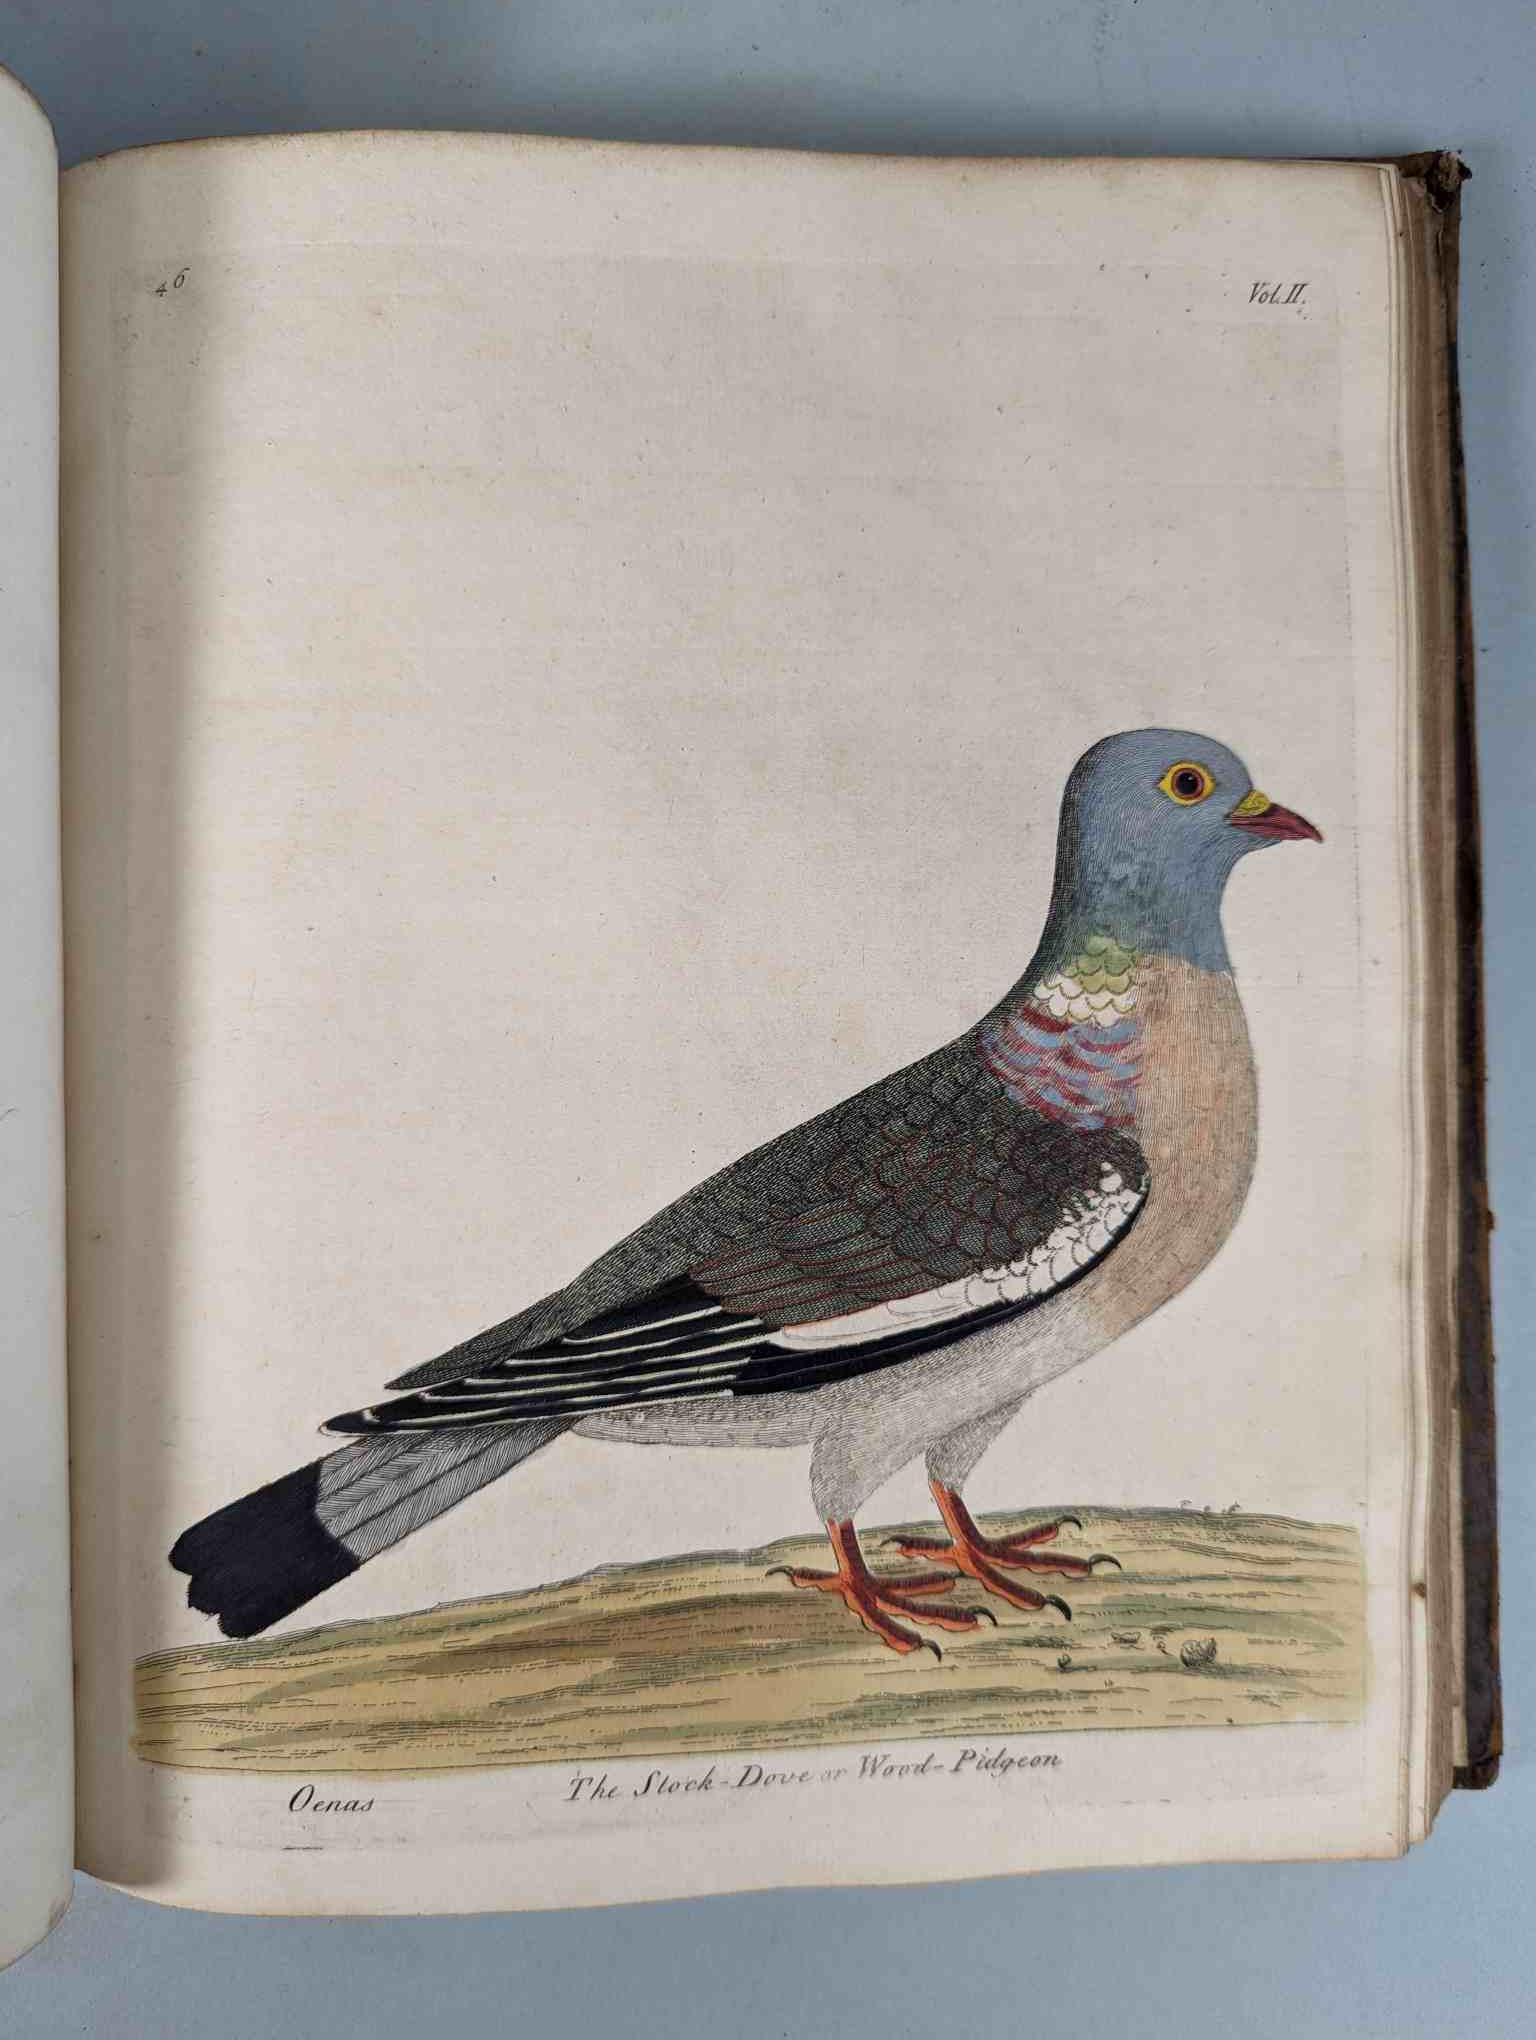 ALBIN, Eleazar. A Natural History of Birds, to which are added, Notes and Observations by W. - Image 150 of 208